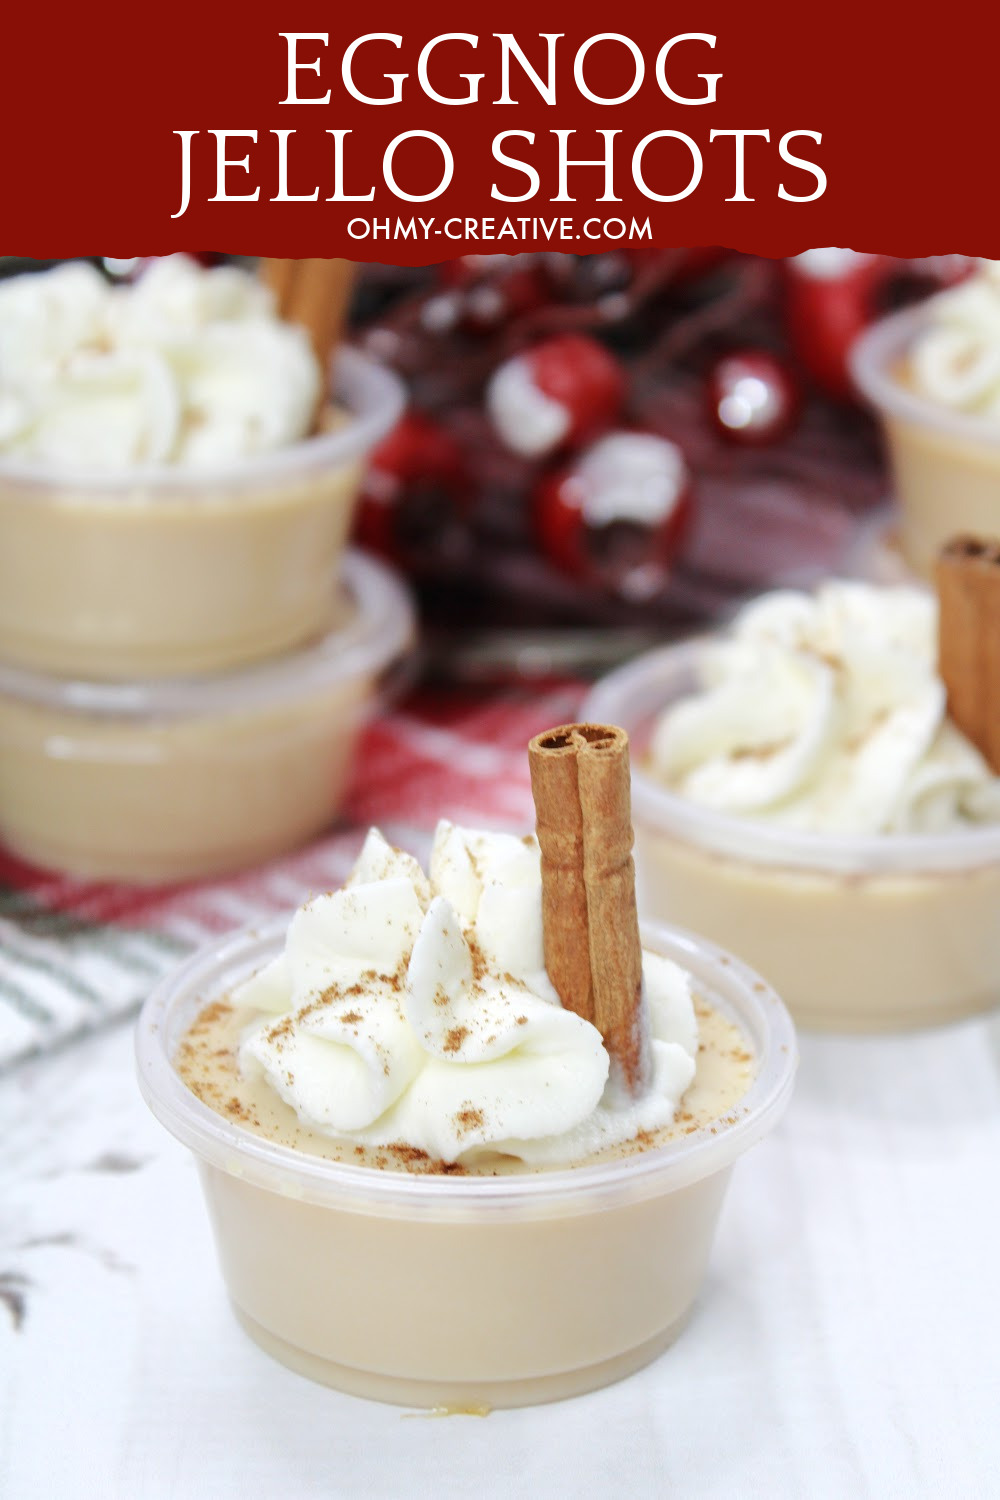 Rich and creamy eggnog jello shots topped with whipped cream a sprinkle of nutmeg and garnished with a cinnamon stick.